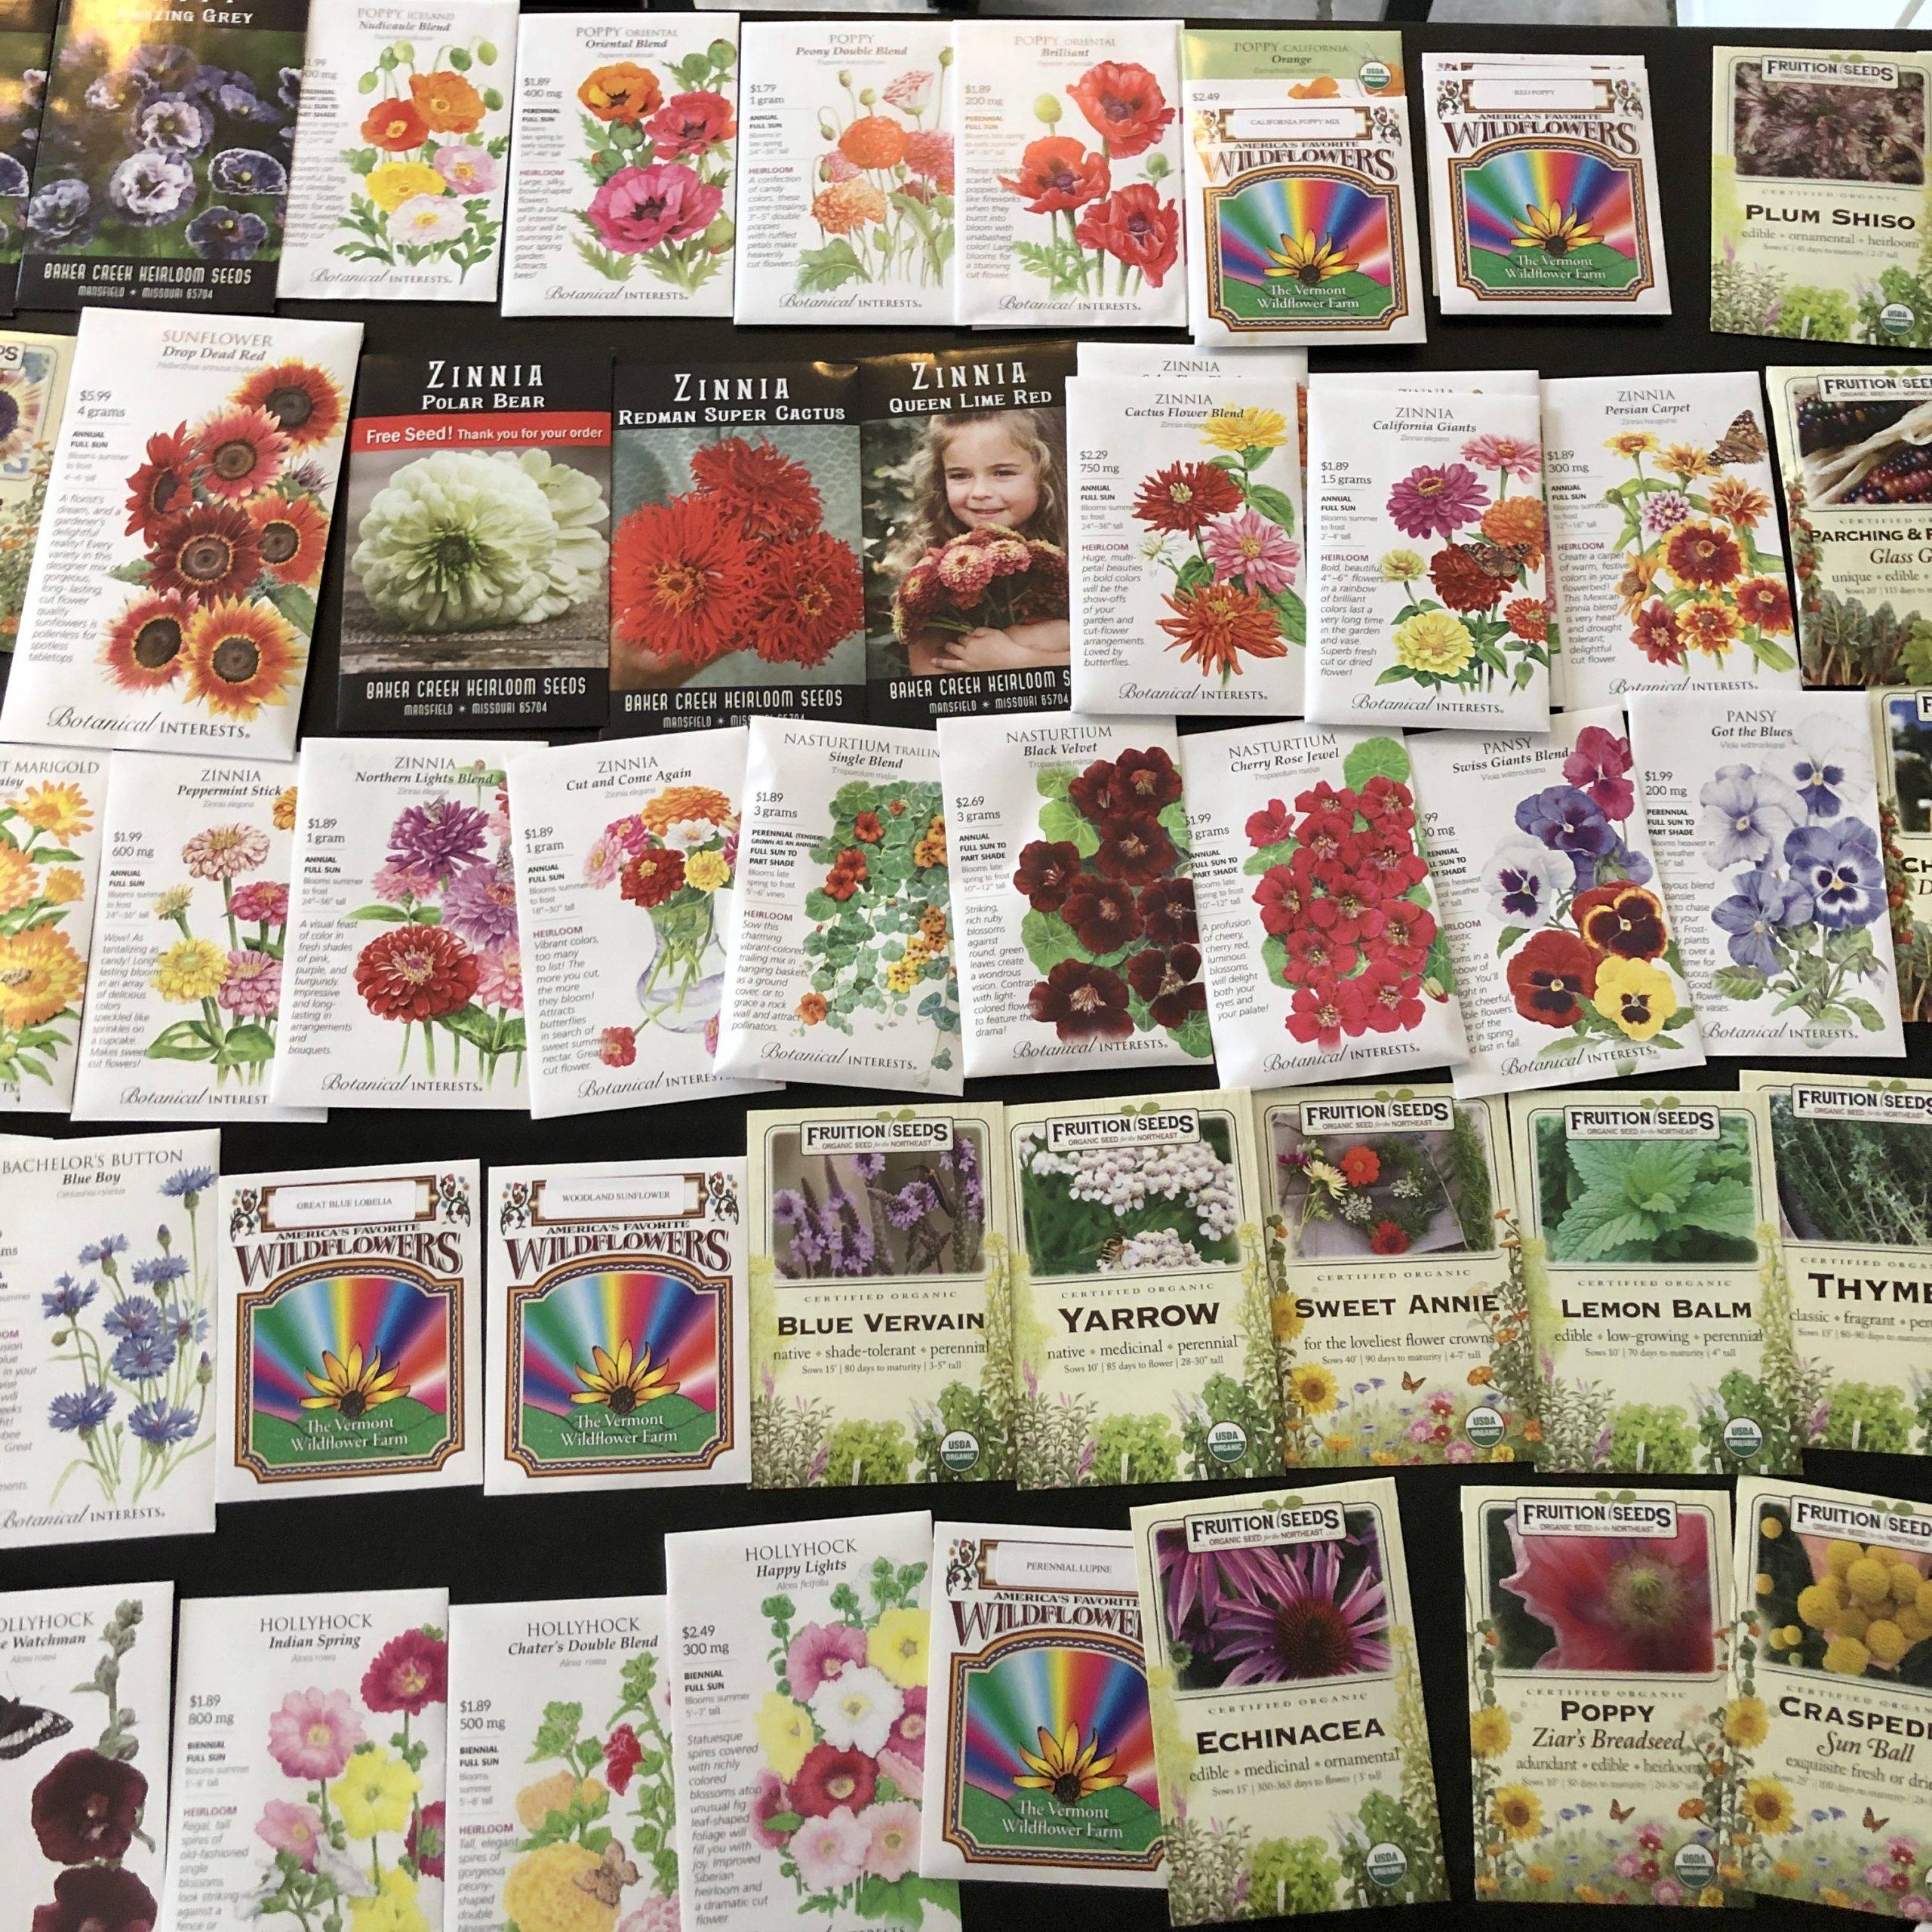 2020 Seed Planning - Seed to Sprout